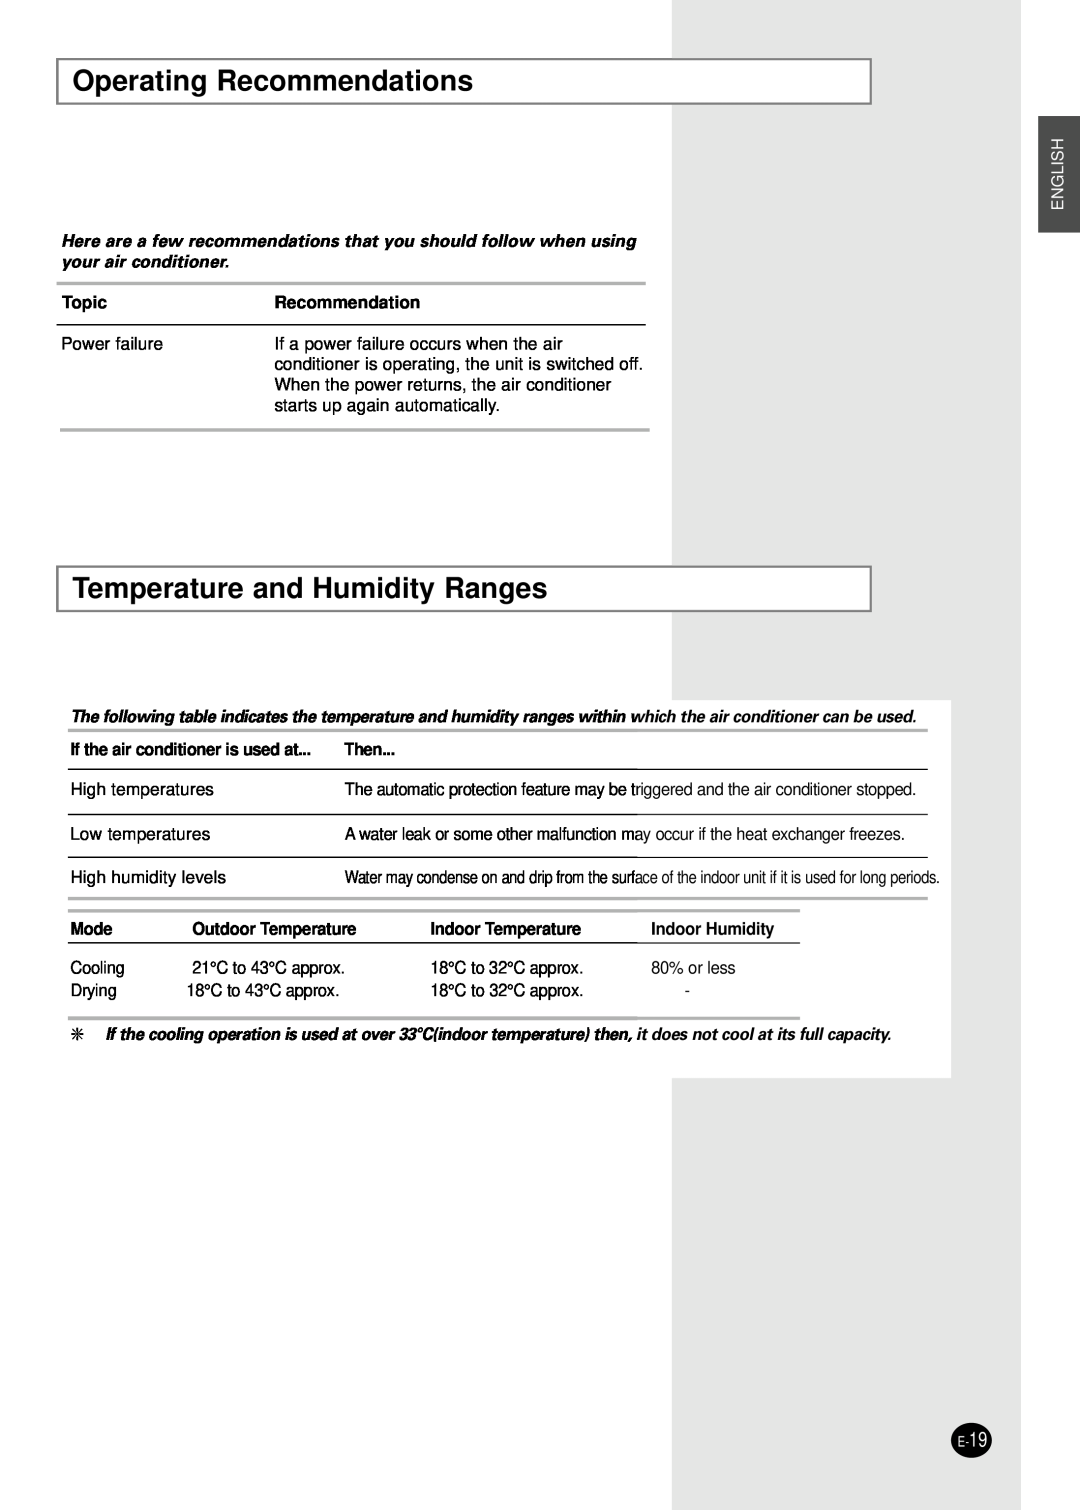 Samsung US14SGGB Operating Recommendations, Temperature and Humidity Ranges, English, Topic, Then, Mode, Indoor Humidity 